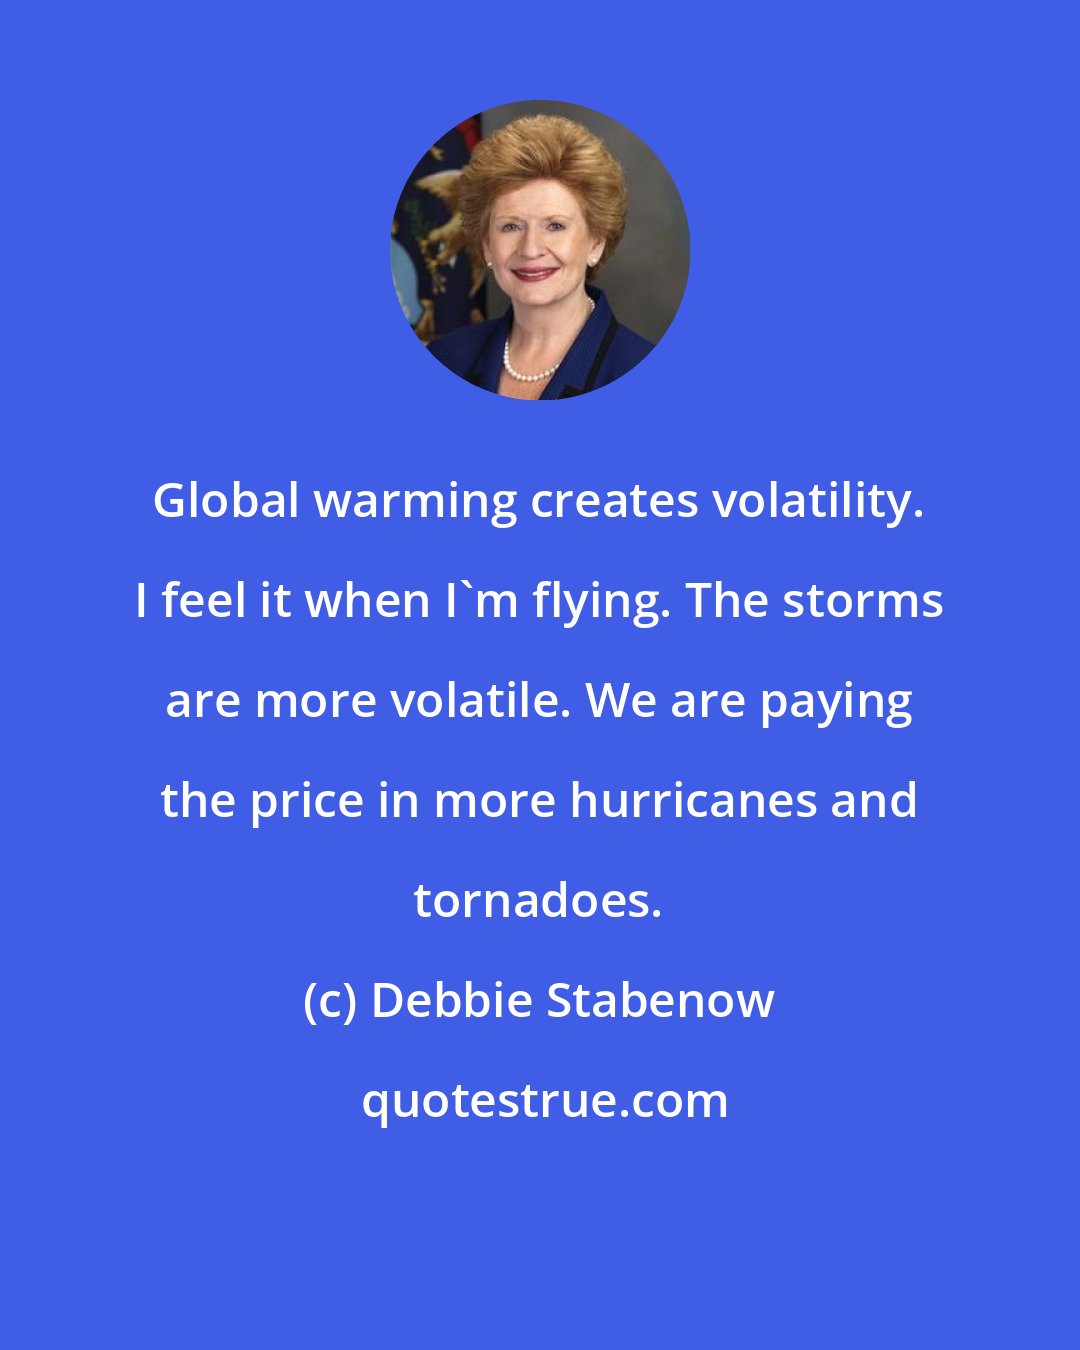 Debbie Stabenow: Global warming creates volatility. I feel it when I'm flying. The storms are more volatile. We are paying the price in more hurricanes and tornadoes.